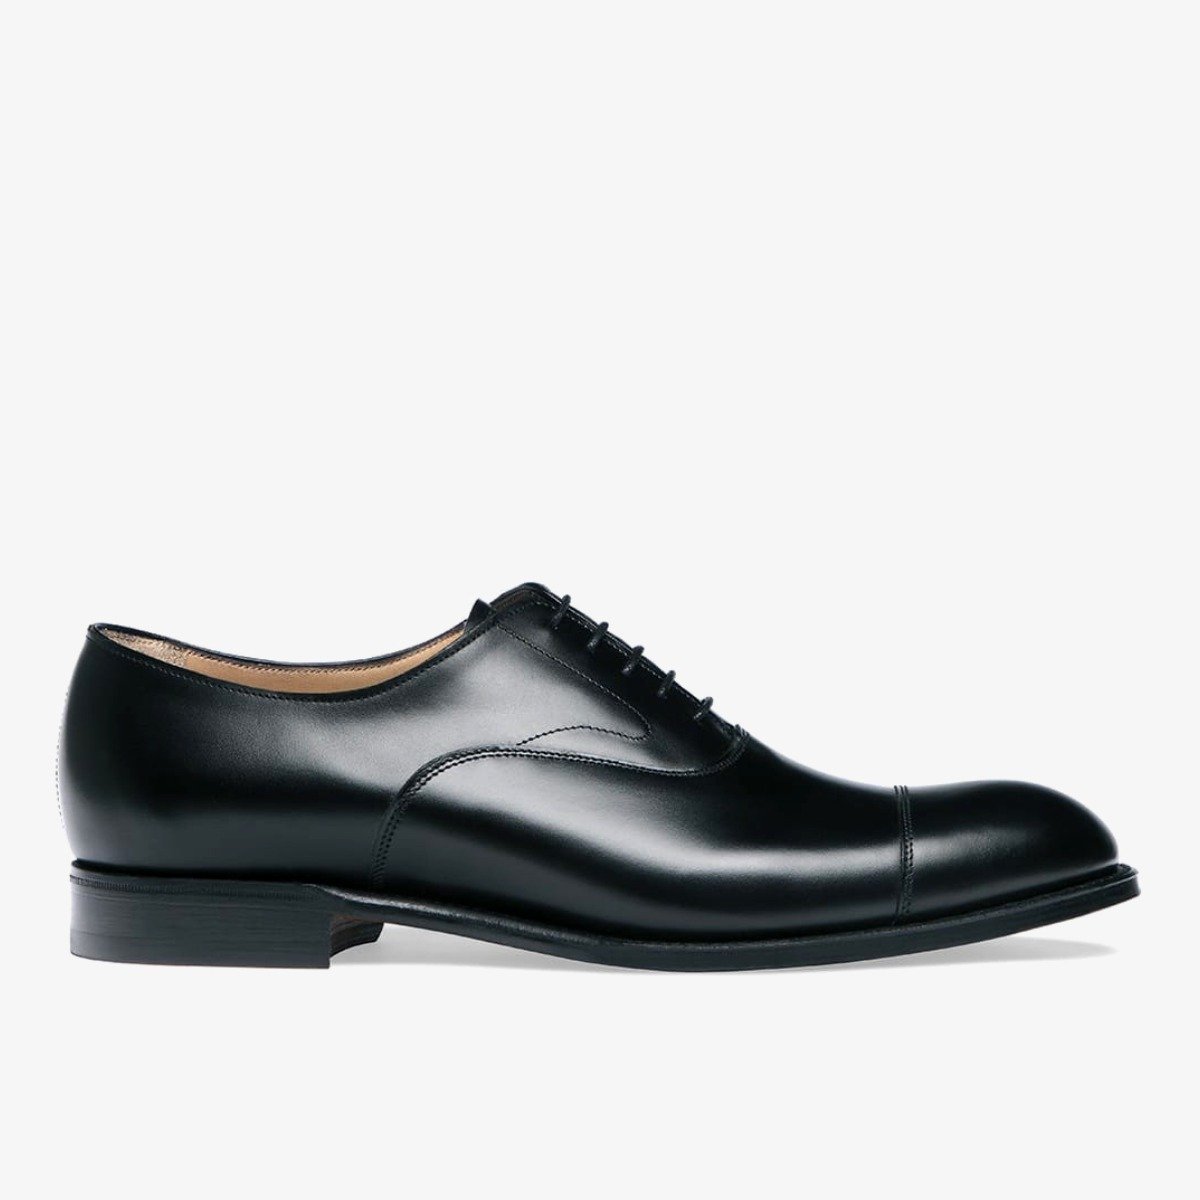 Cheaney Alfred black toe cap oxford shoes - G fit